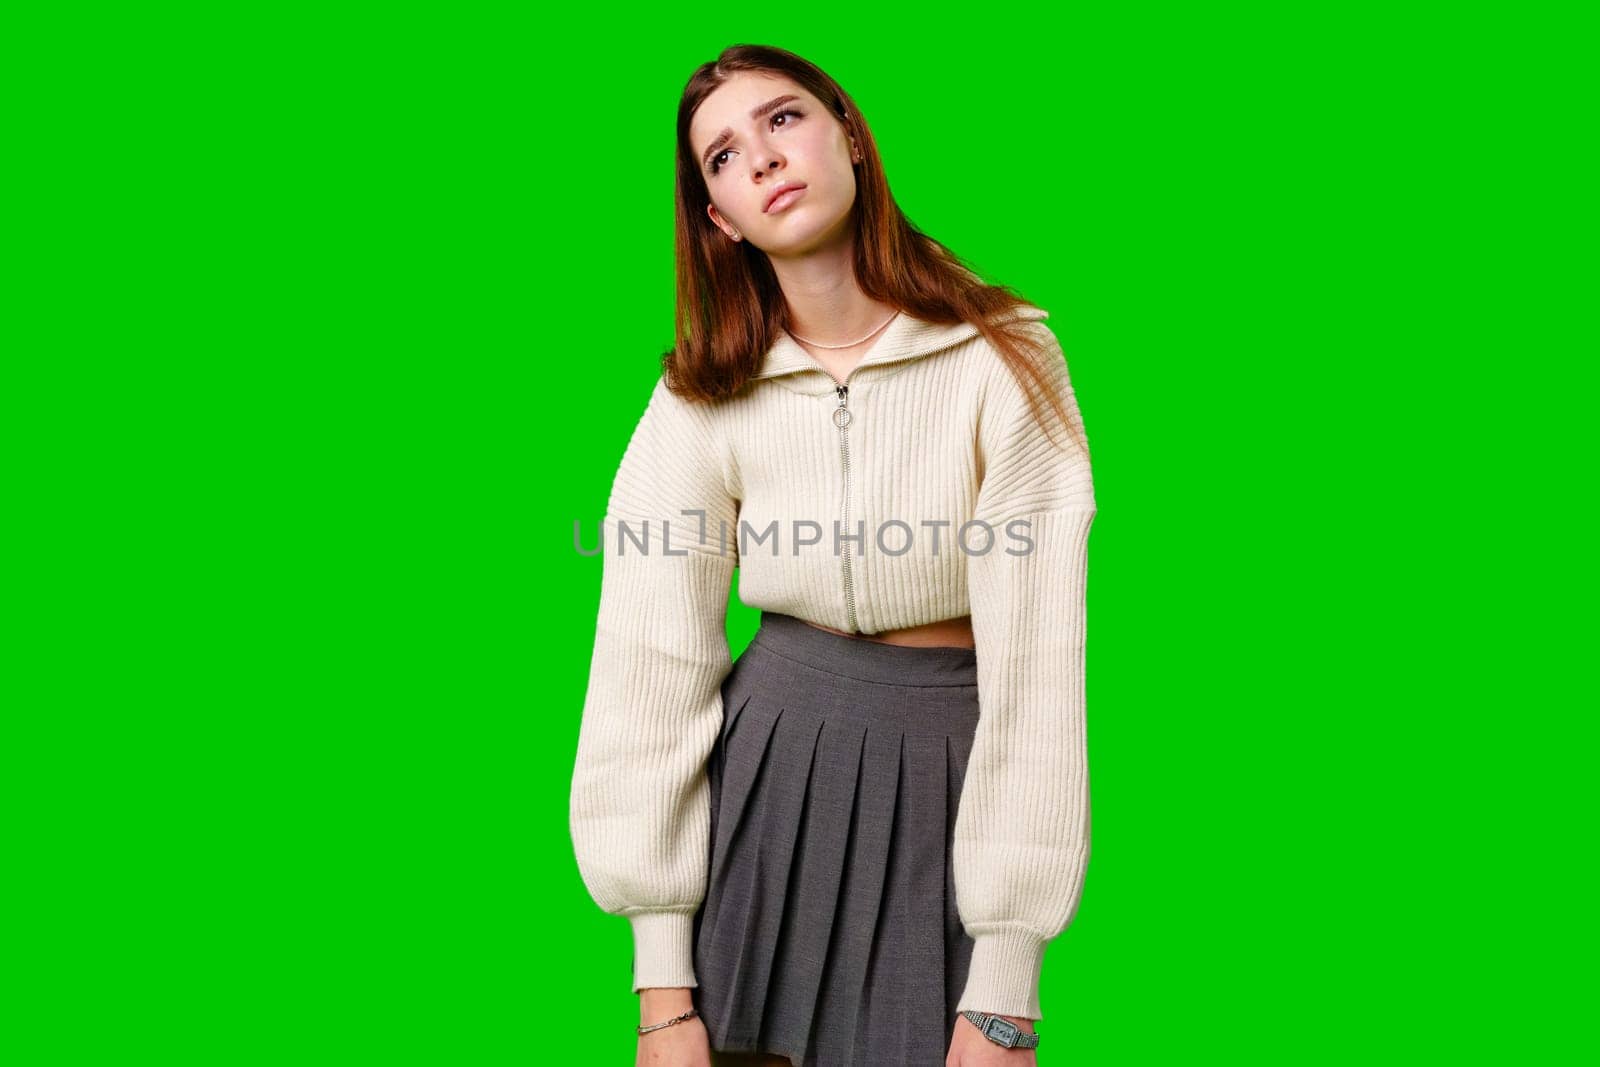 A woman wearing a skirt and sweater stands confidently against a vibrant green background. Her posture exudes strength and poise as she gazes ahead.